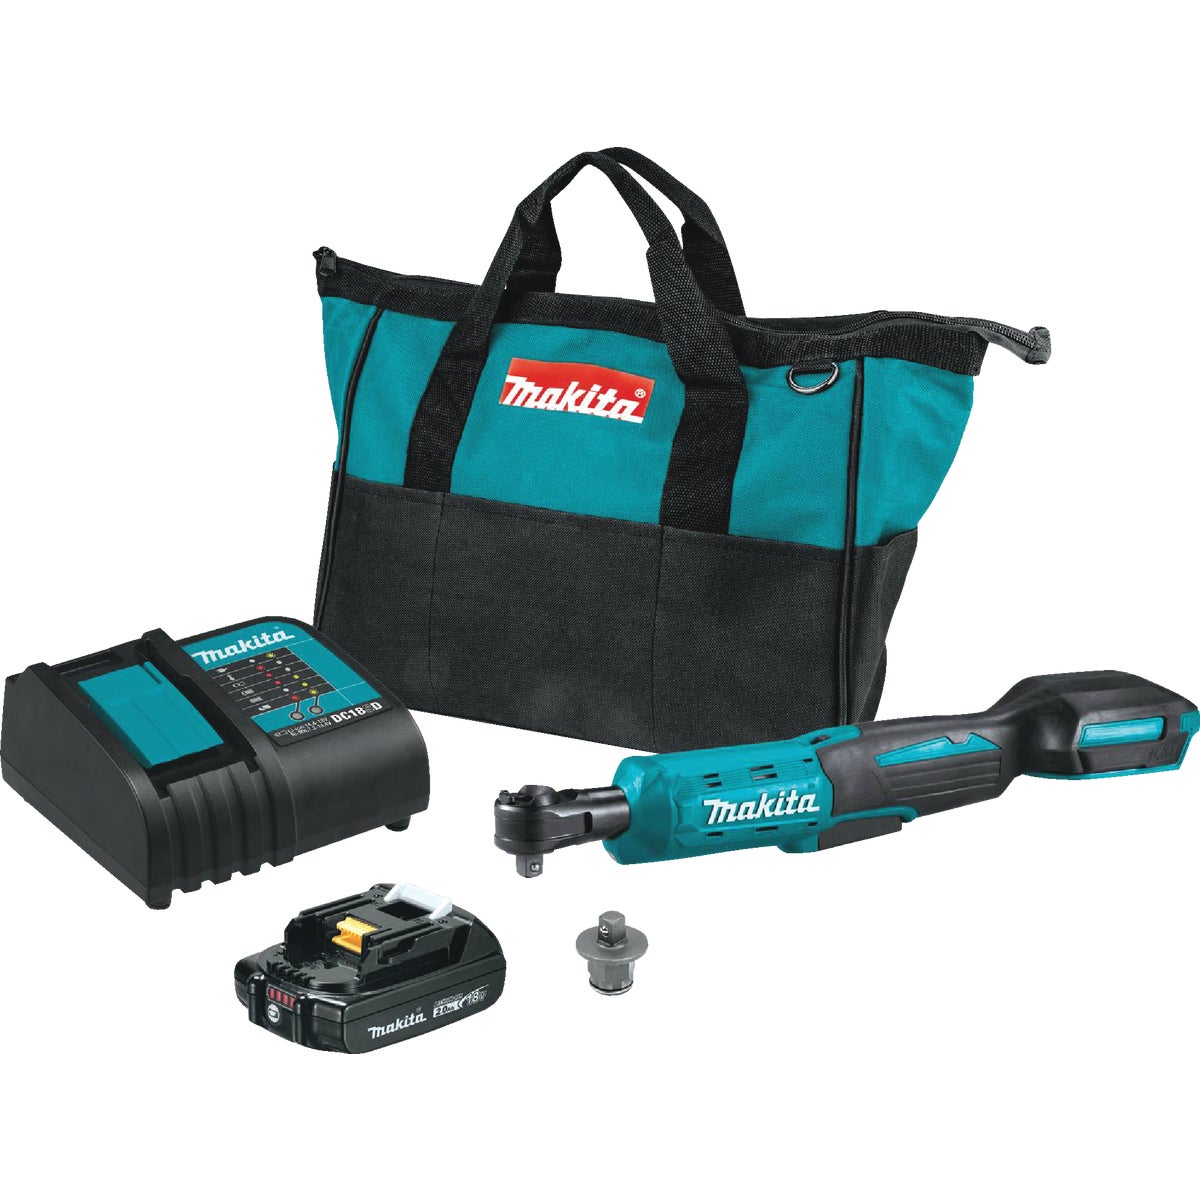 Makita 18-Volt LXT Lithium-Ion 3/8 In. / 1/4 In. Cordless Ratchet Kit